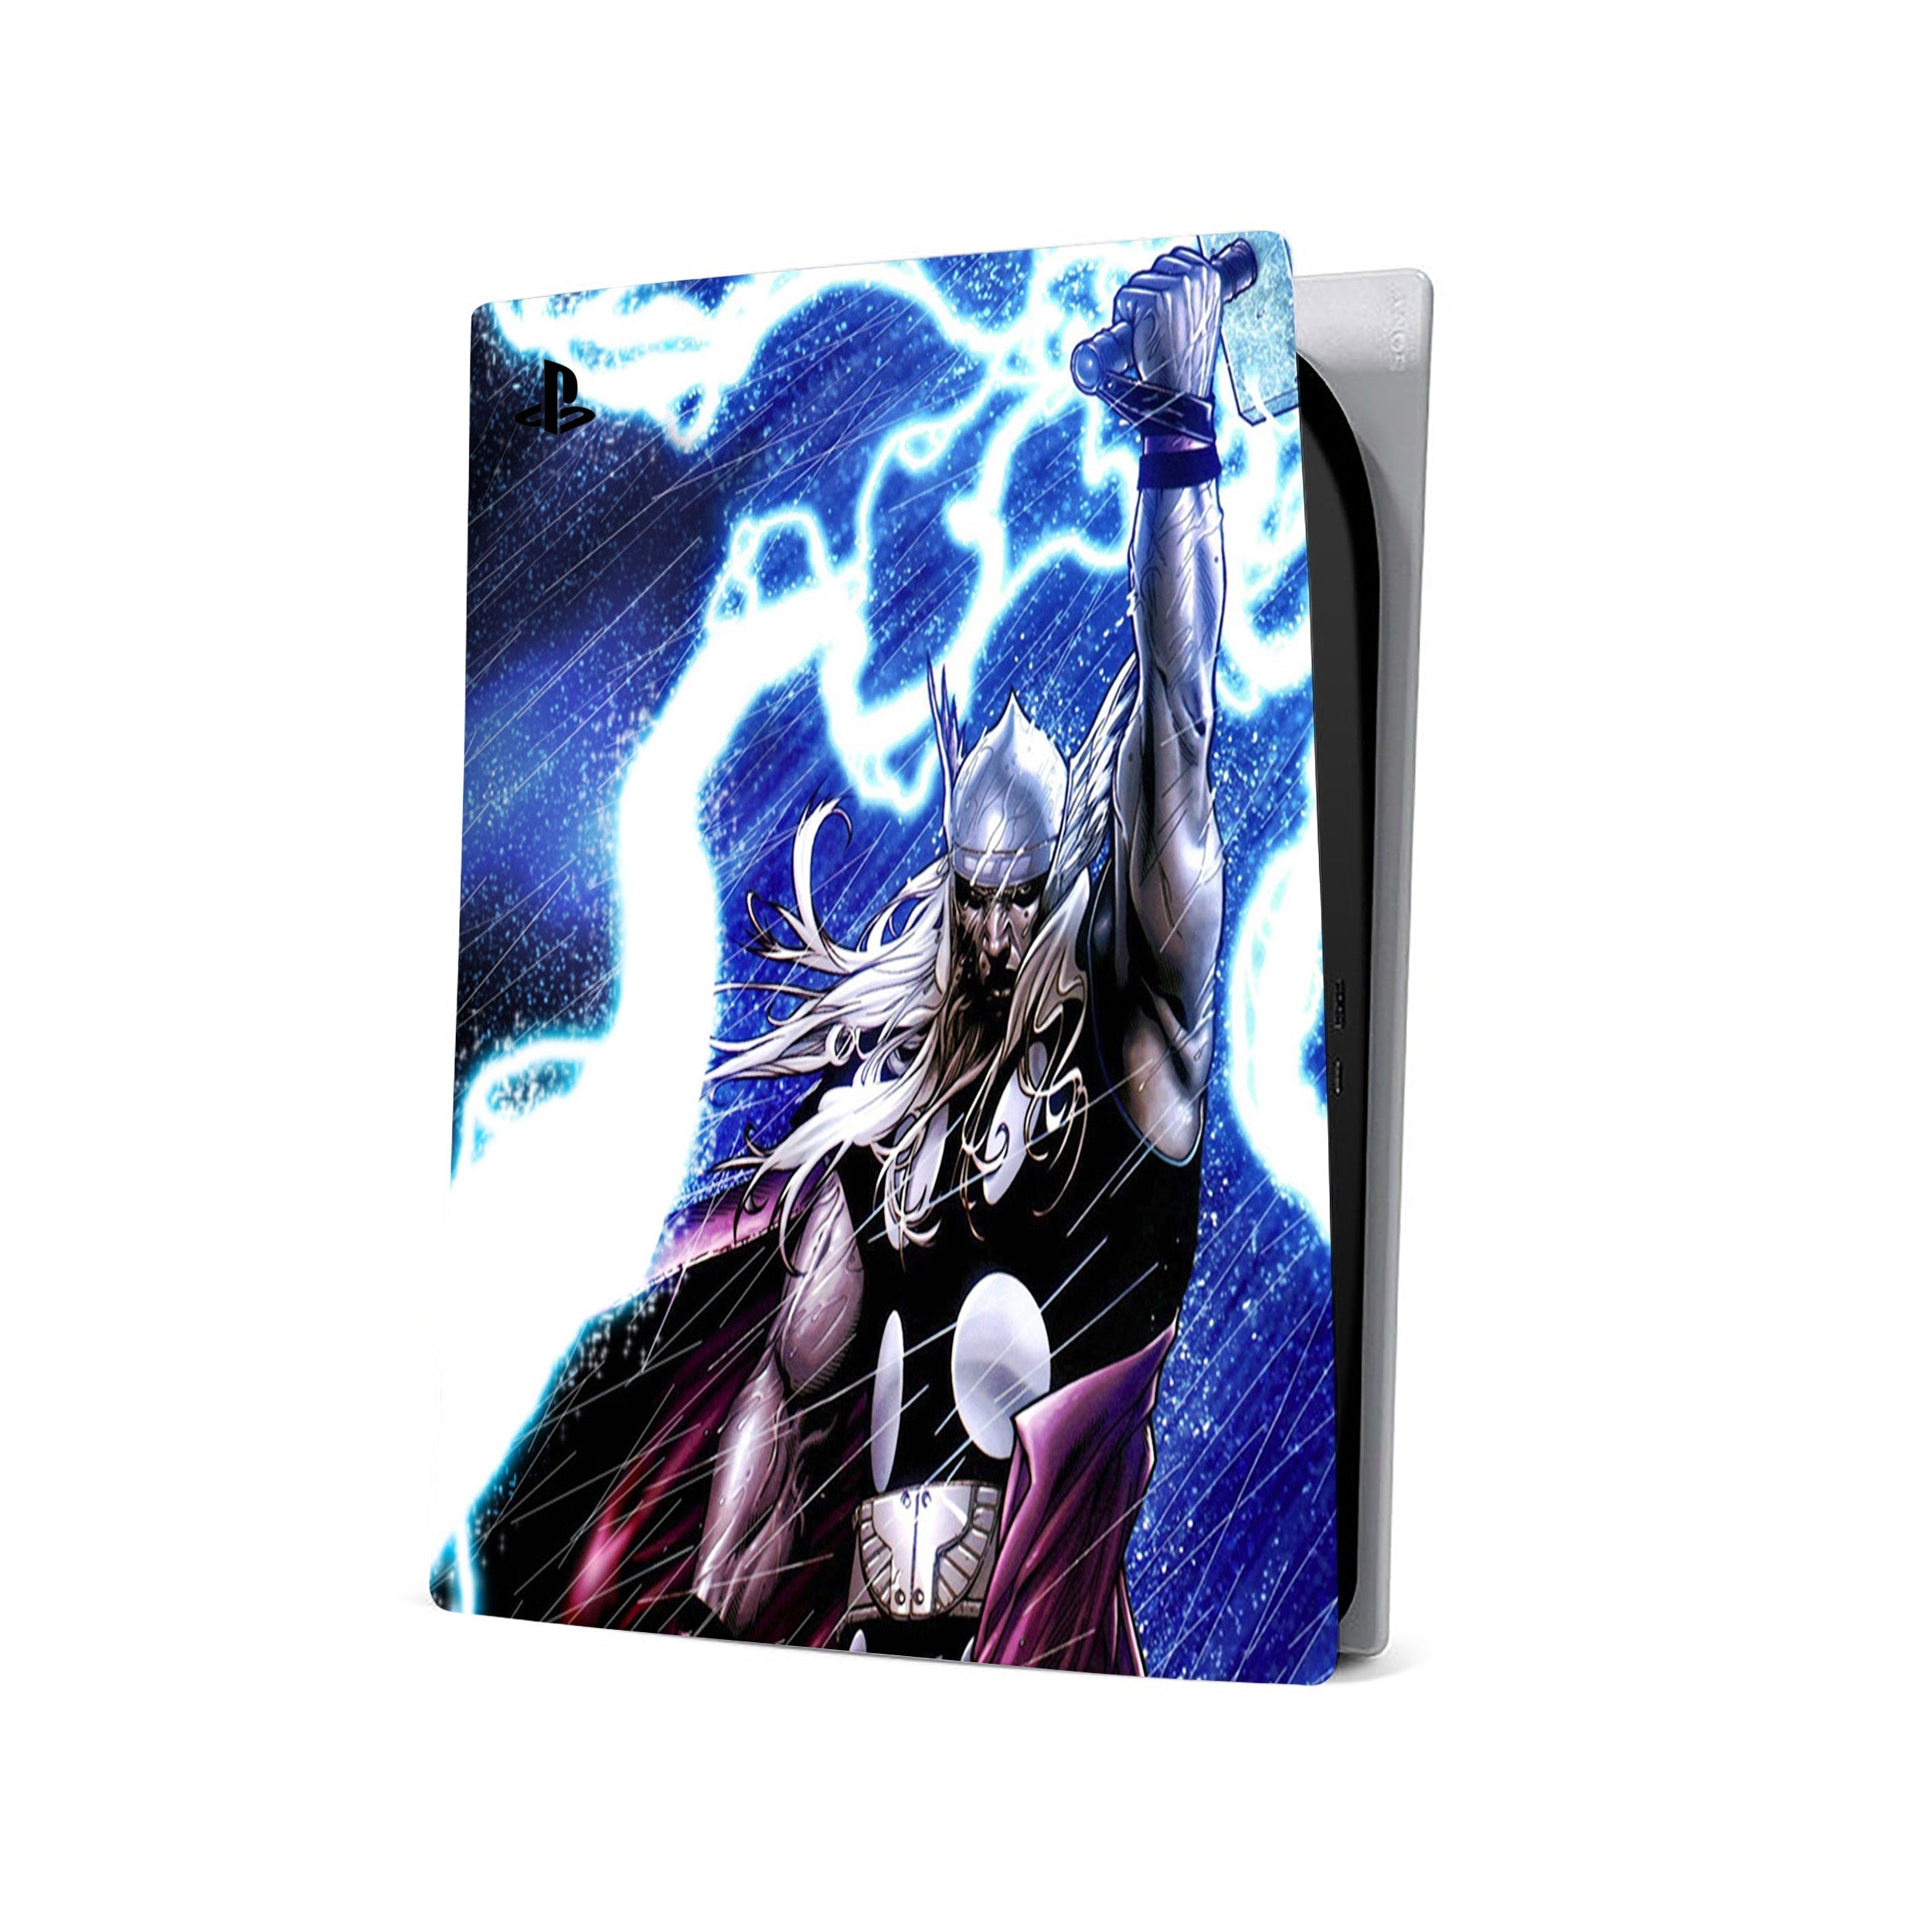 A video game skin featuring a Marvel Comics Thor design for the PS5.